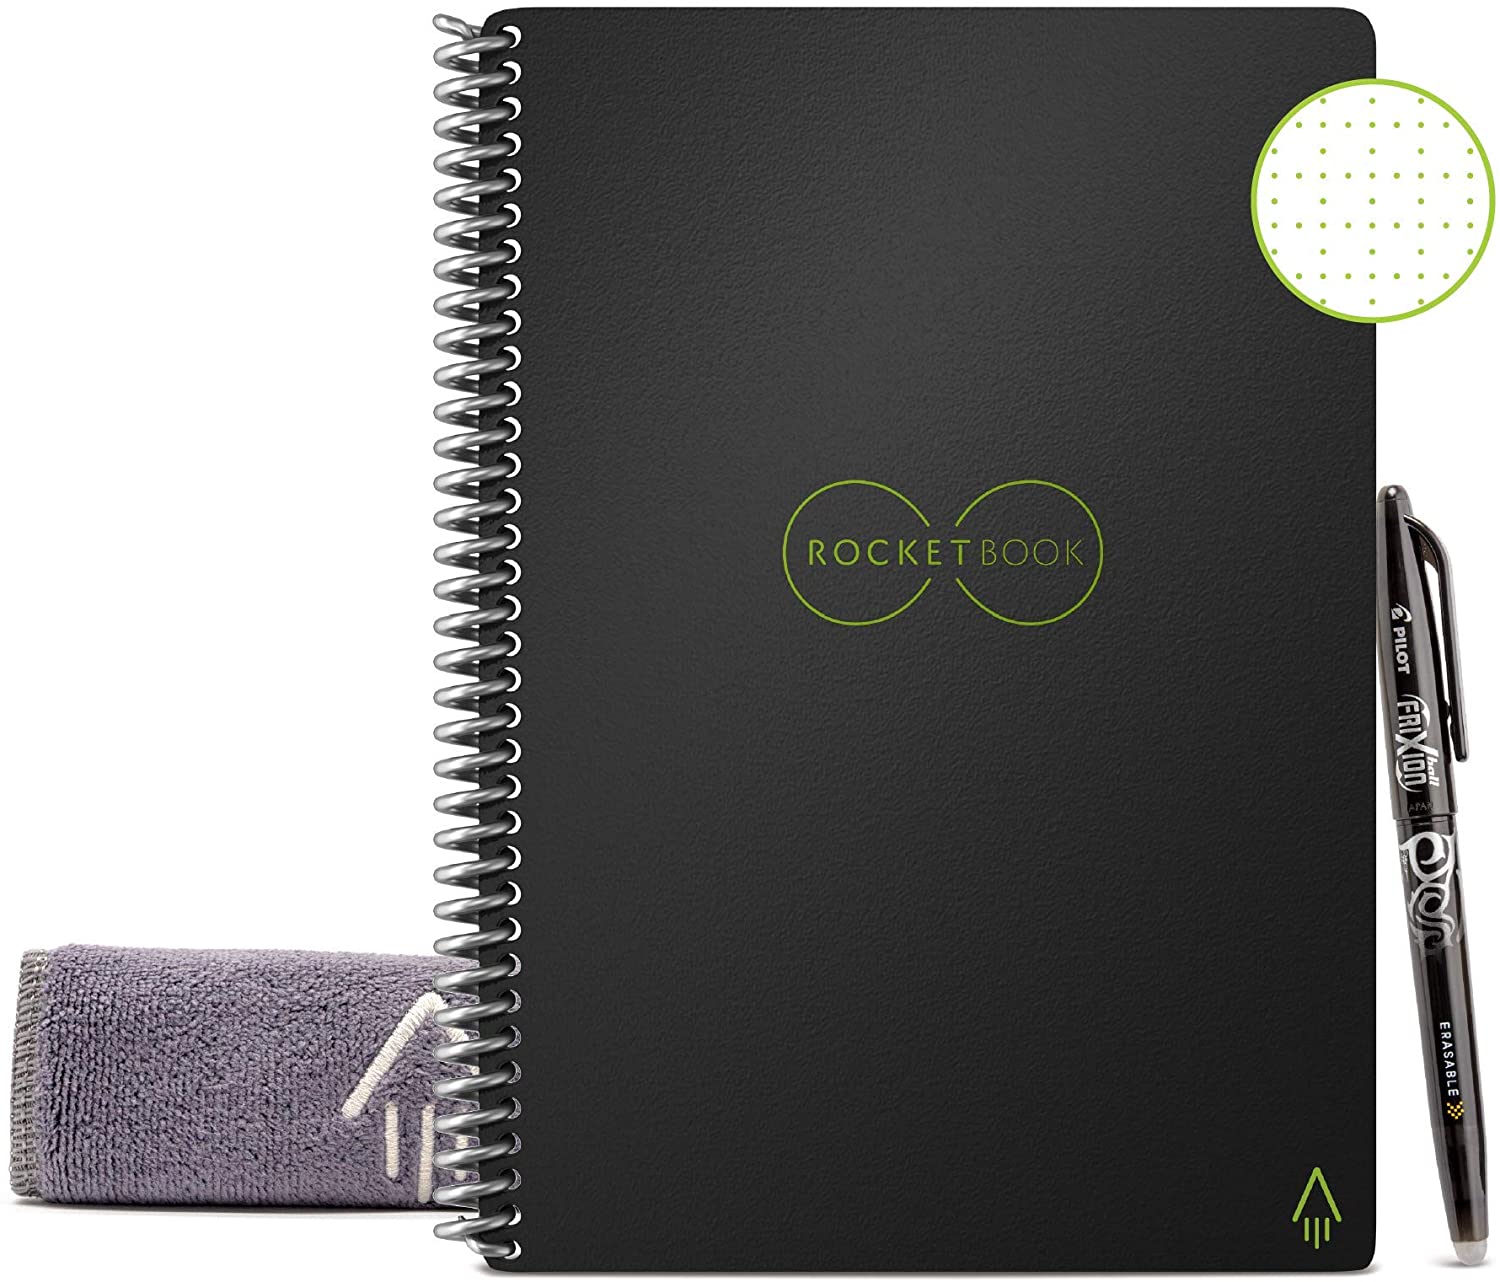 Rocketbook EVR-E-K-A Everlast Smart Reusable Notebook with Pen and Microfiber Cloth, Executive Size, Black